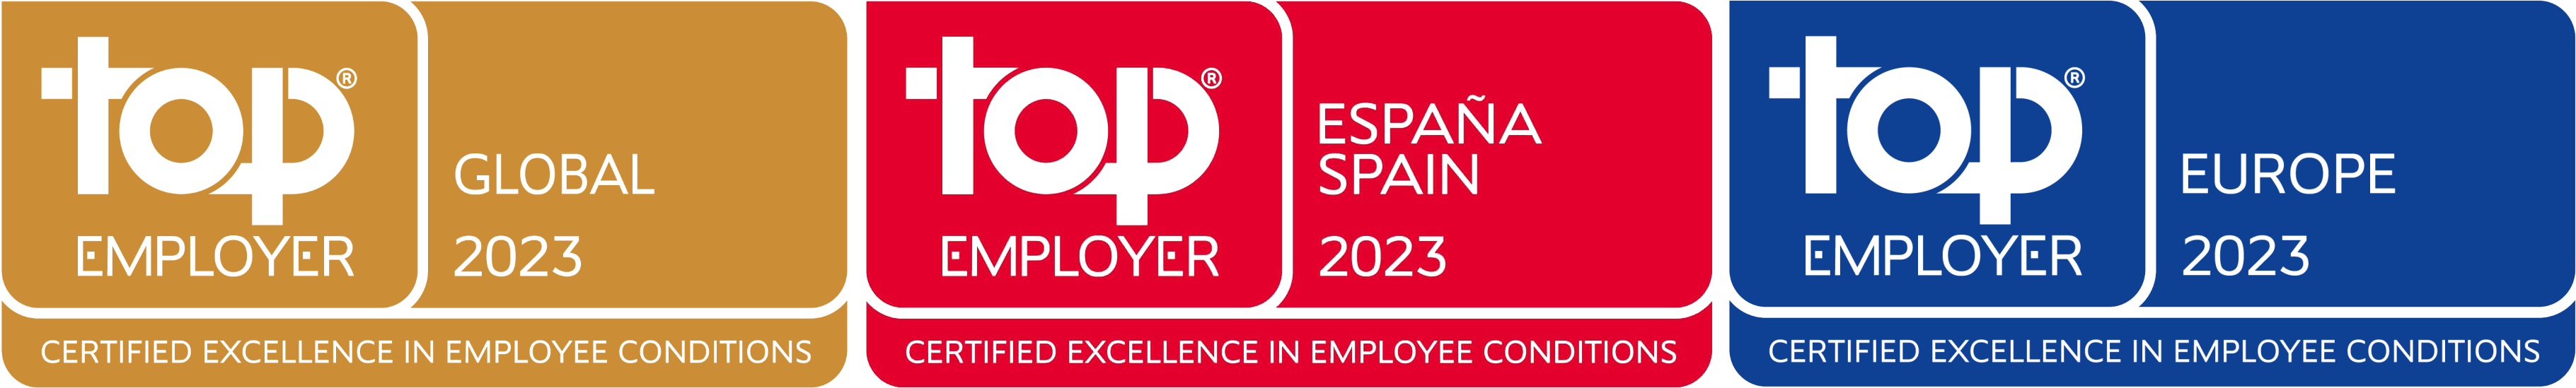 TopEmployer_Espana.png